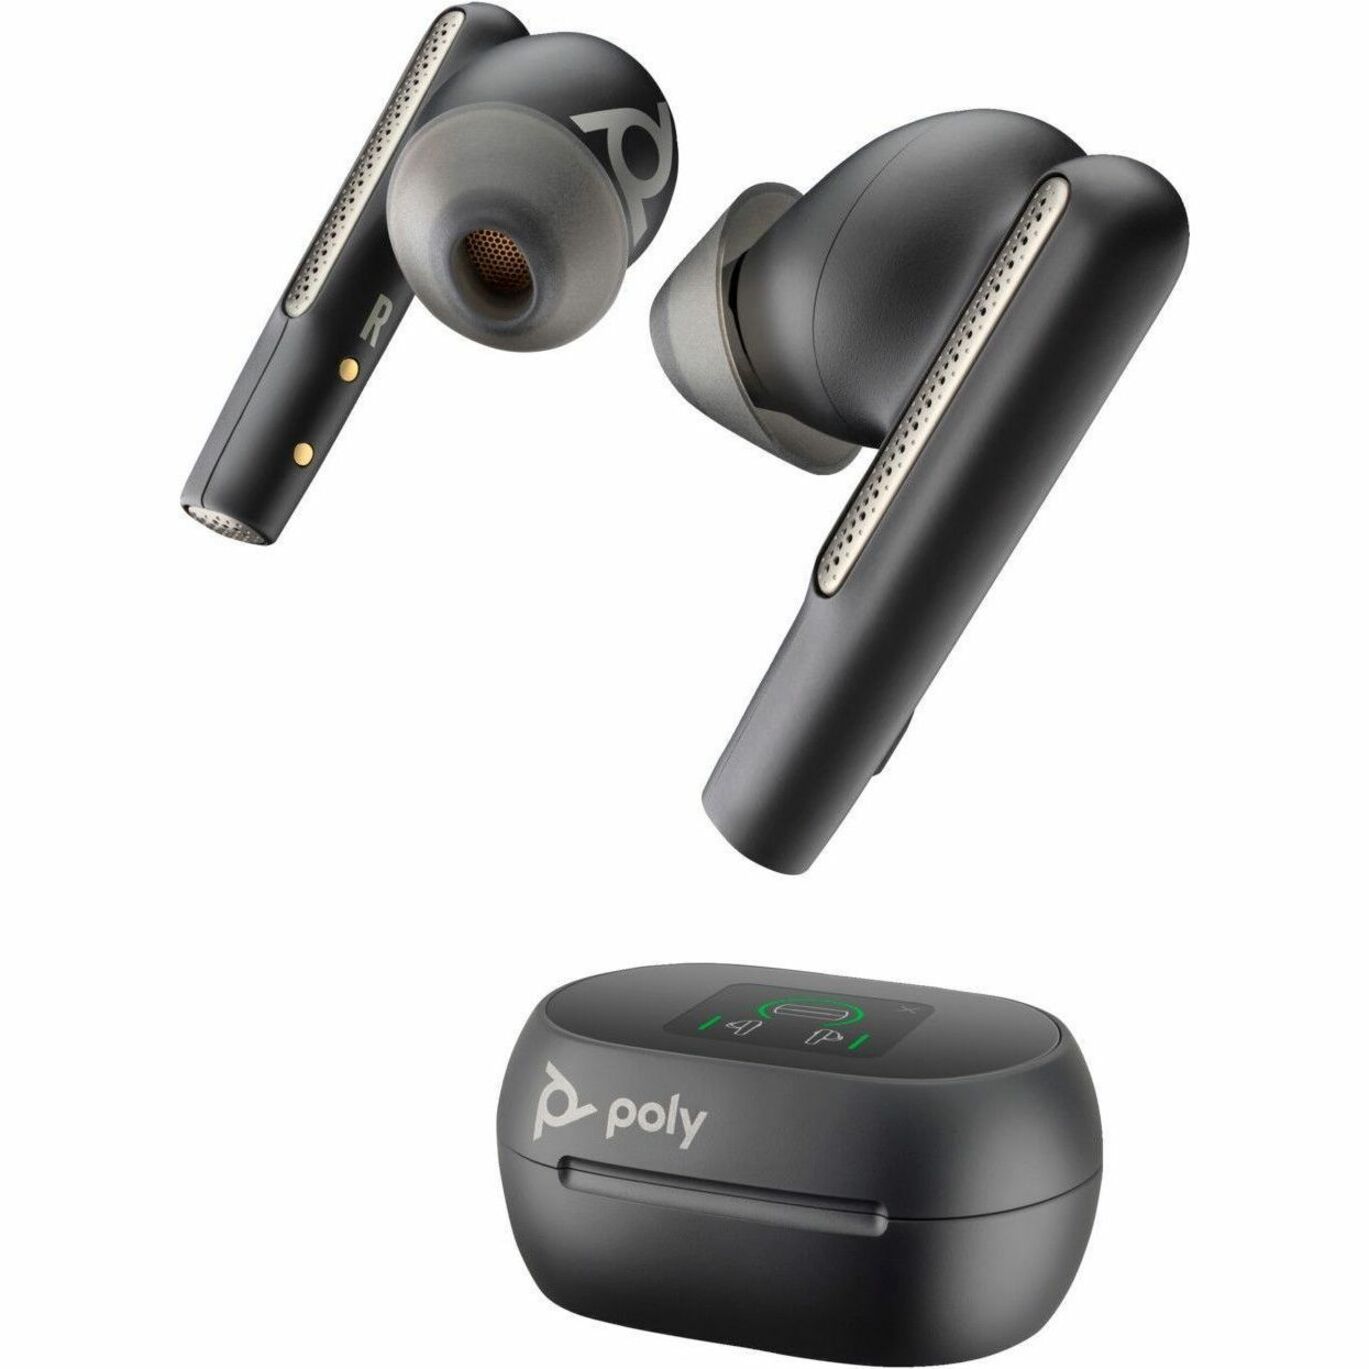 Poly 7Y8G4AA Voyager Free 60+ UC Earset, Wireless Bluetooth Earbuds with 2-Year Warranty, Lightweight and Comfortable, Carbon Black